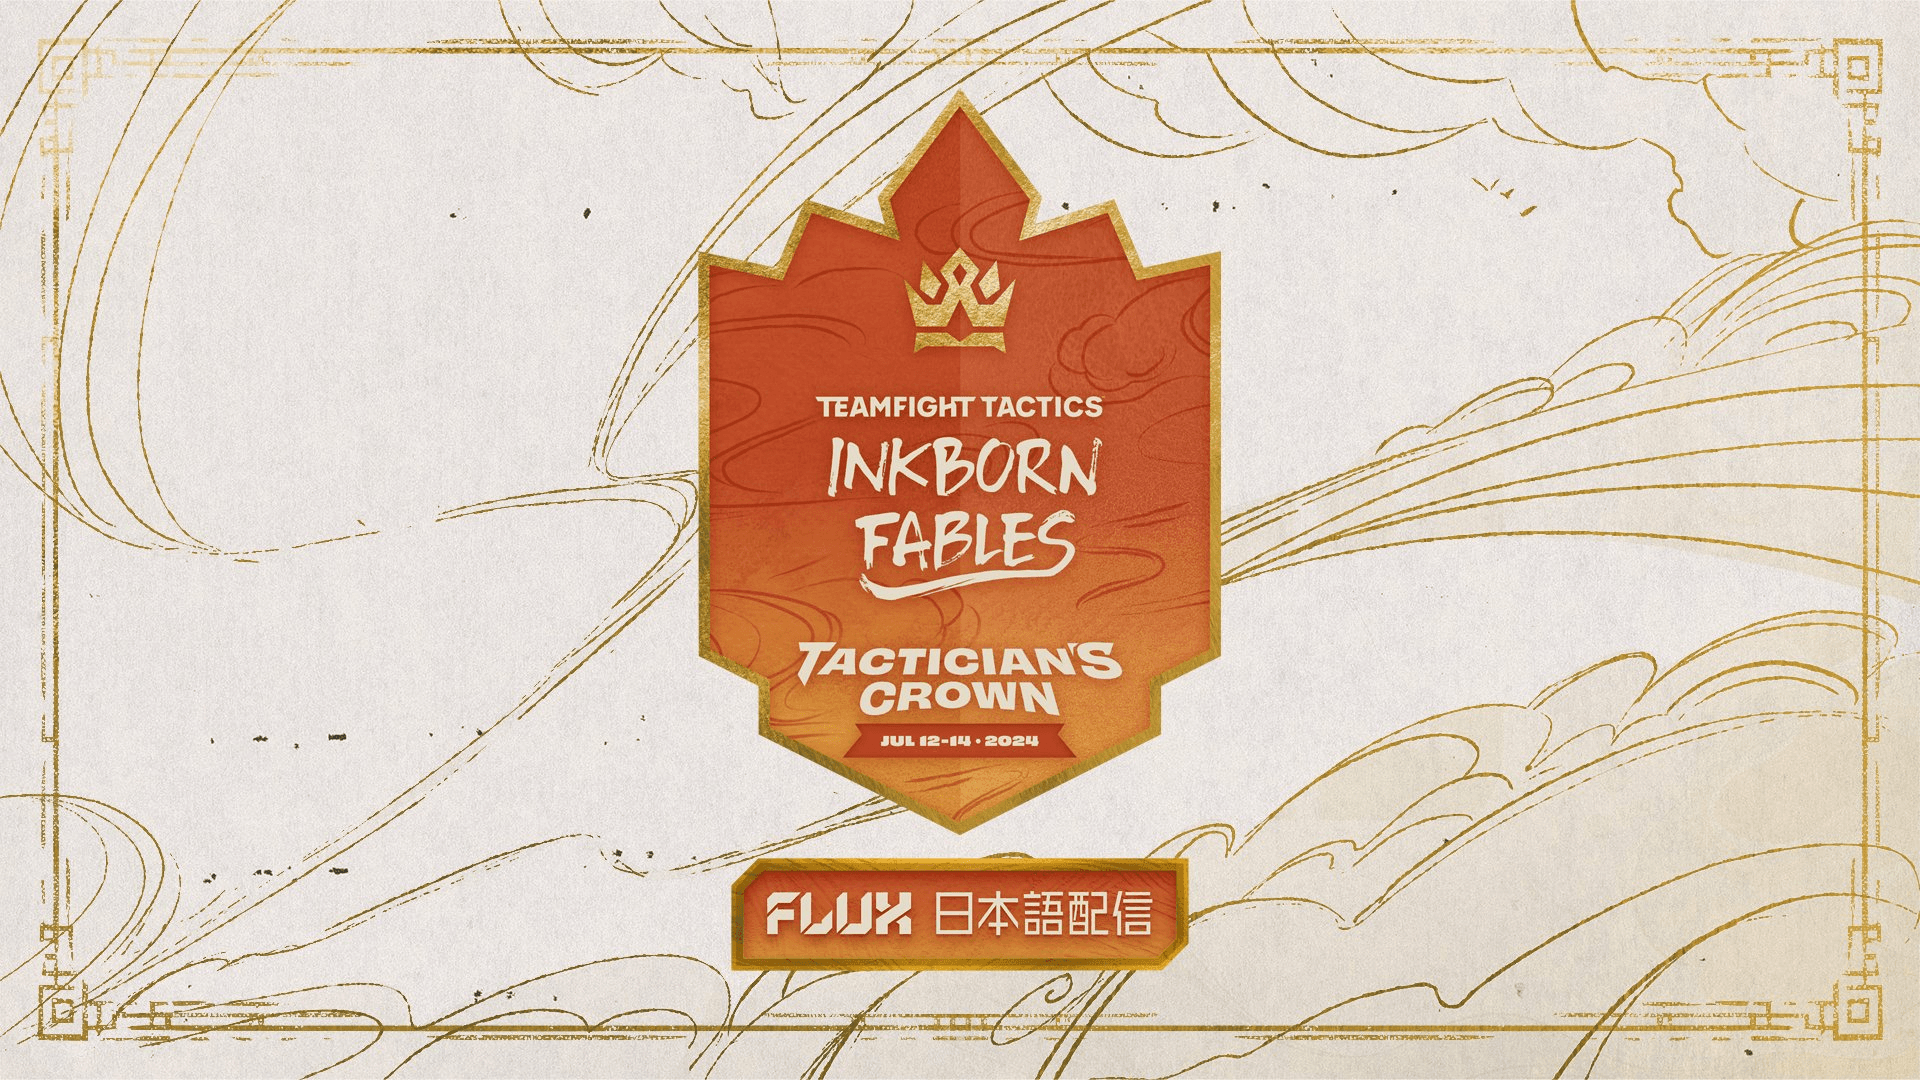 Inkborn Fables Tactician’s Crown - FLUX 日本語配信の見出し画像